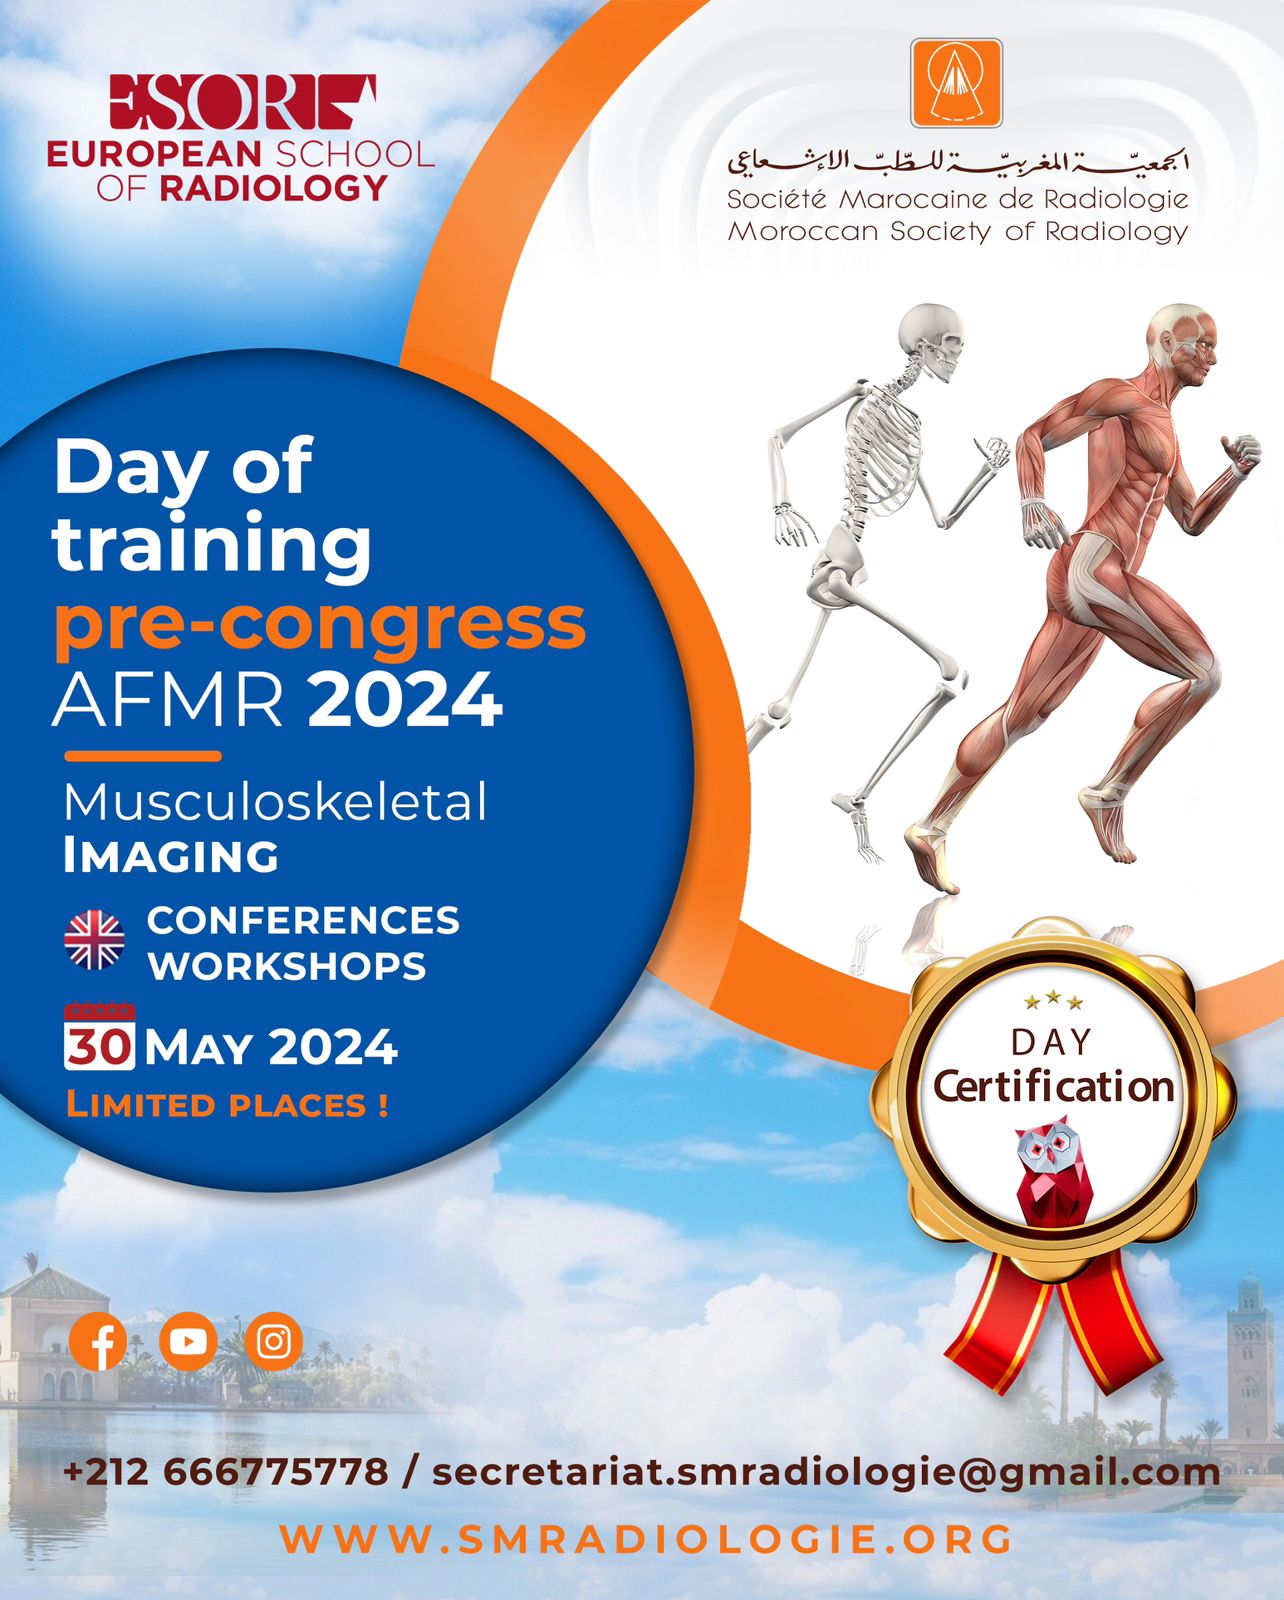 Day of training pre-congress afmr 2024